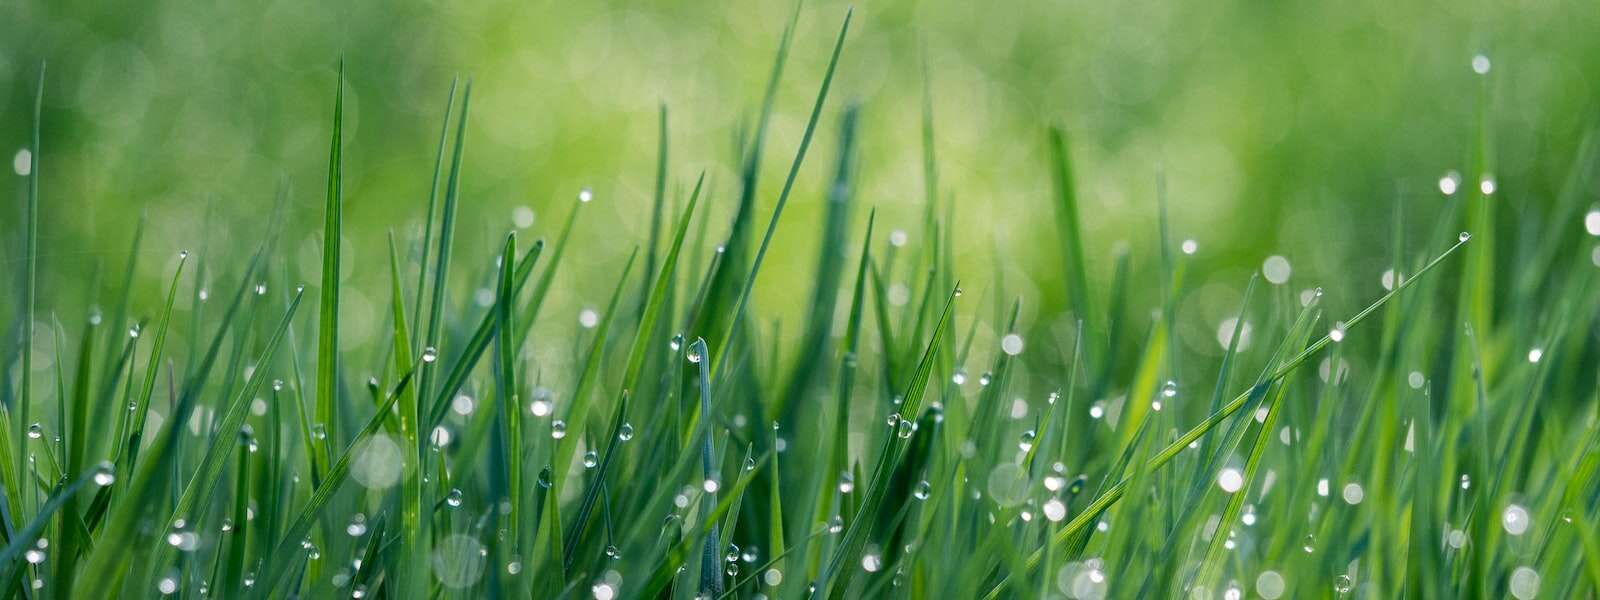 A green grass field with water dews